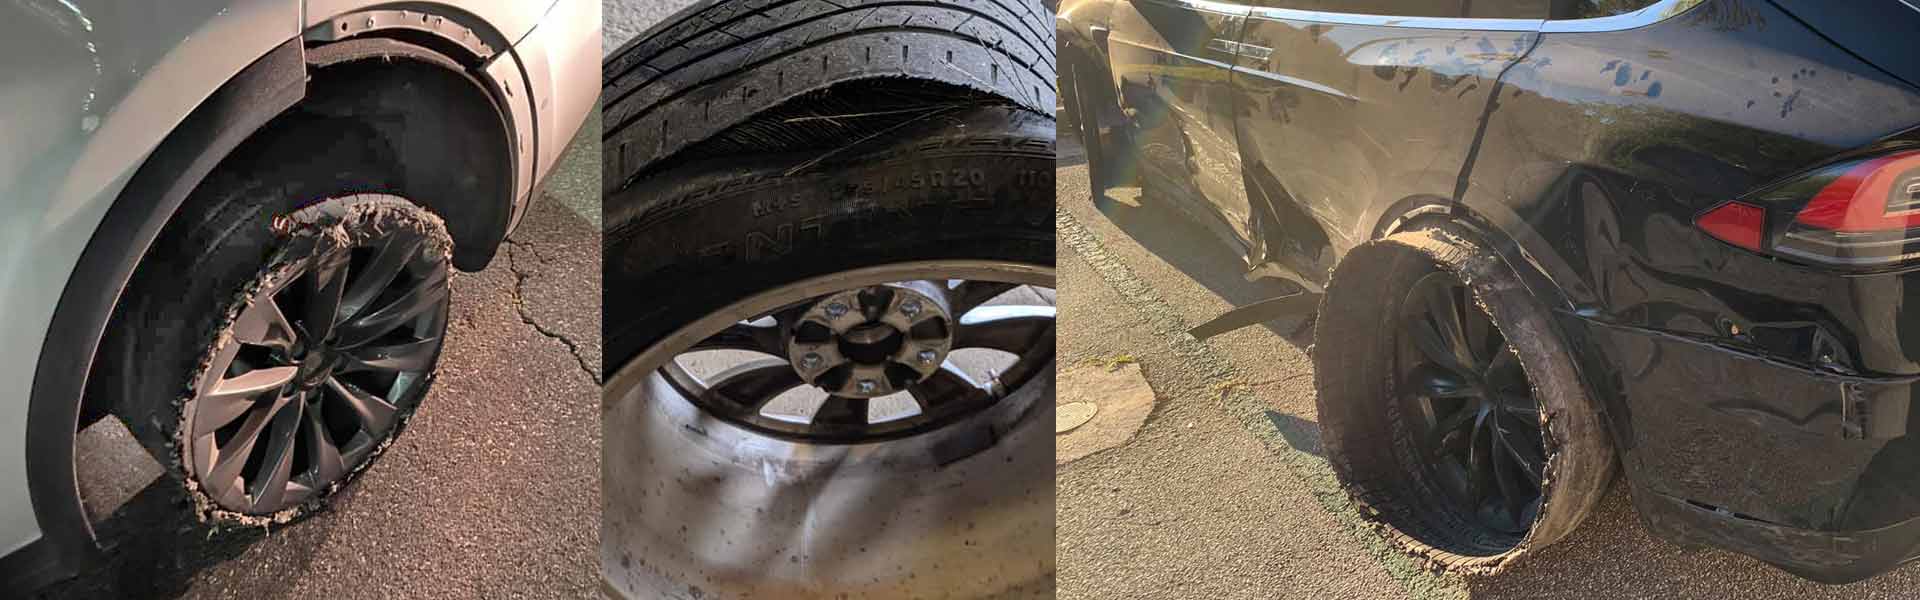 Inner Tire Wear Damage Resulting In A Blowout On The Tesla Model S and X